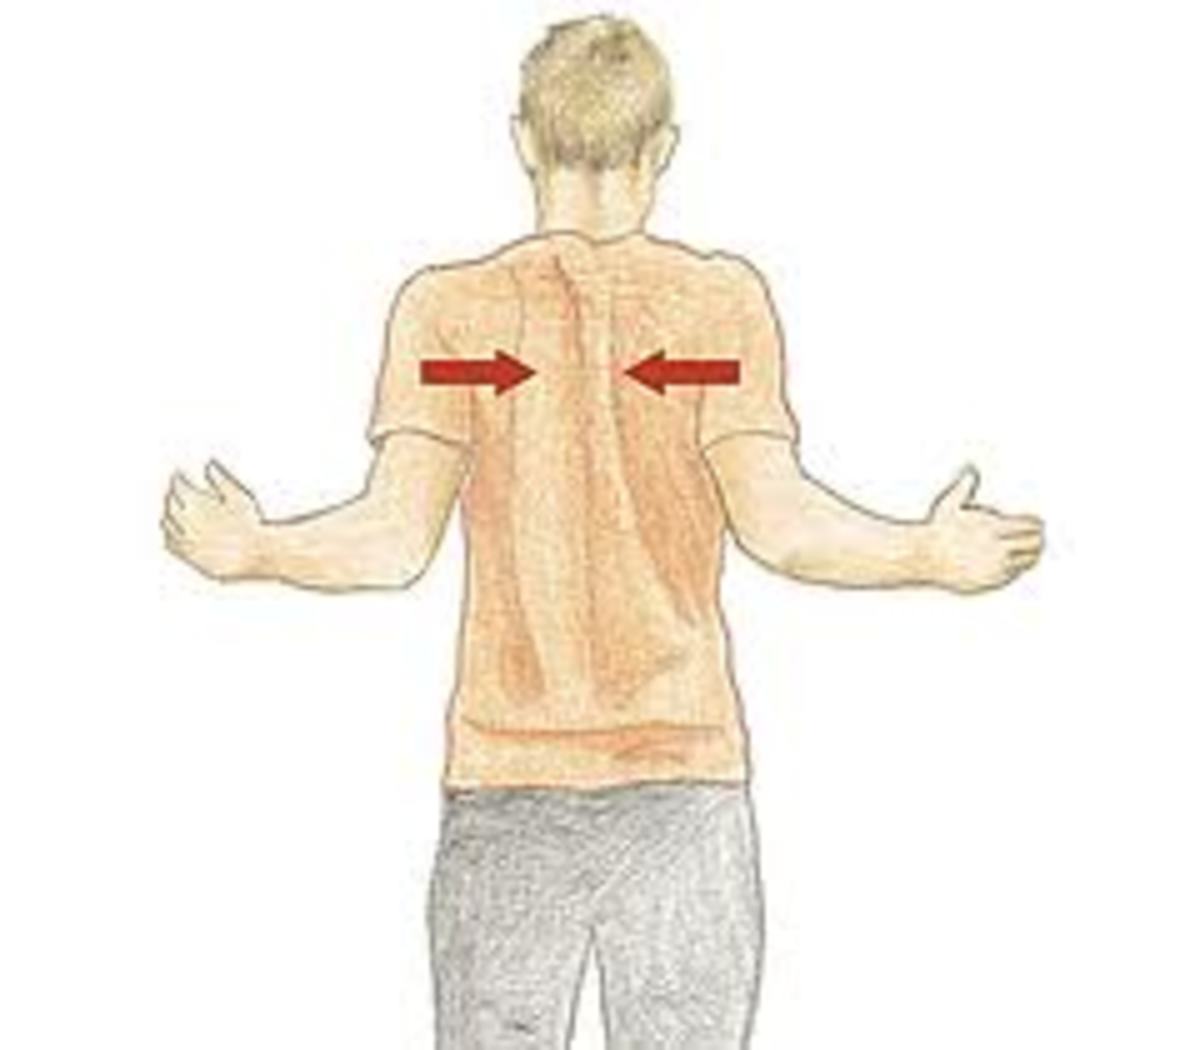 how-to-correct-your-posture-at-your-desk